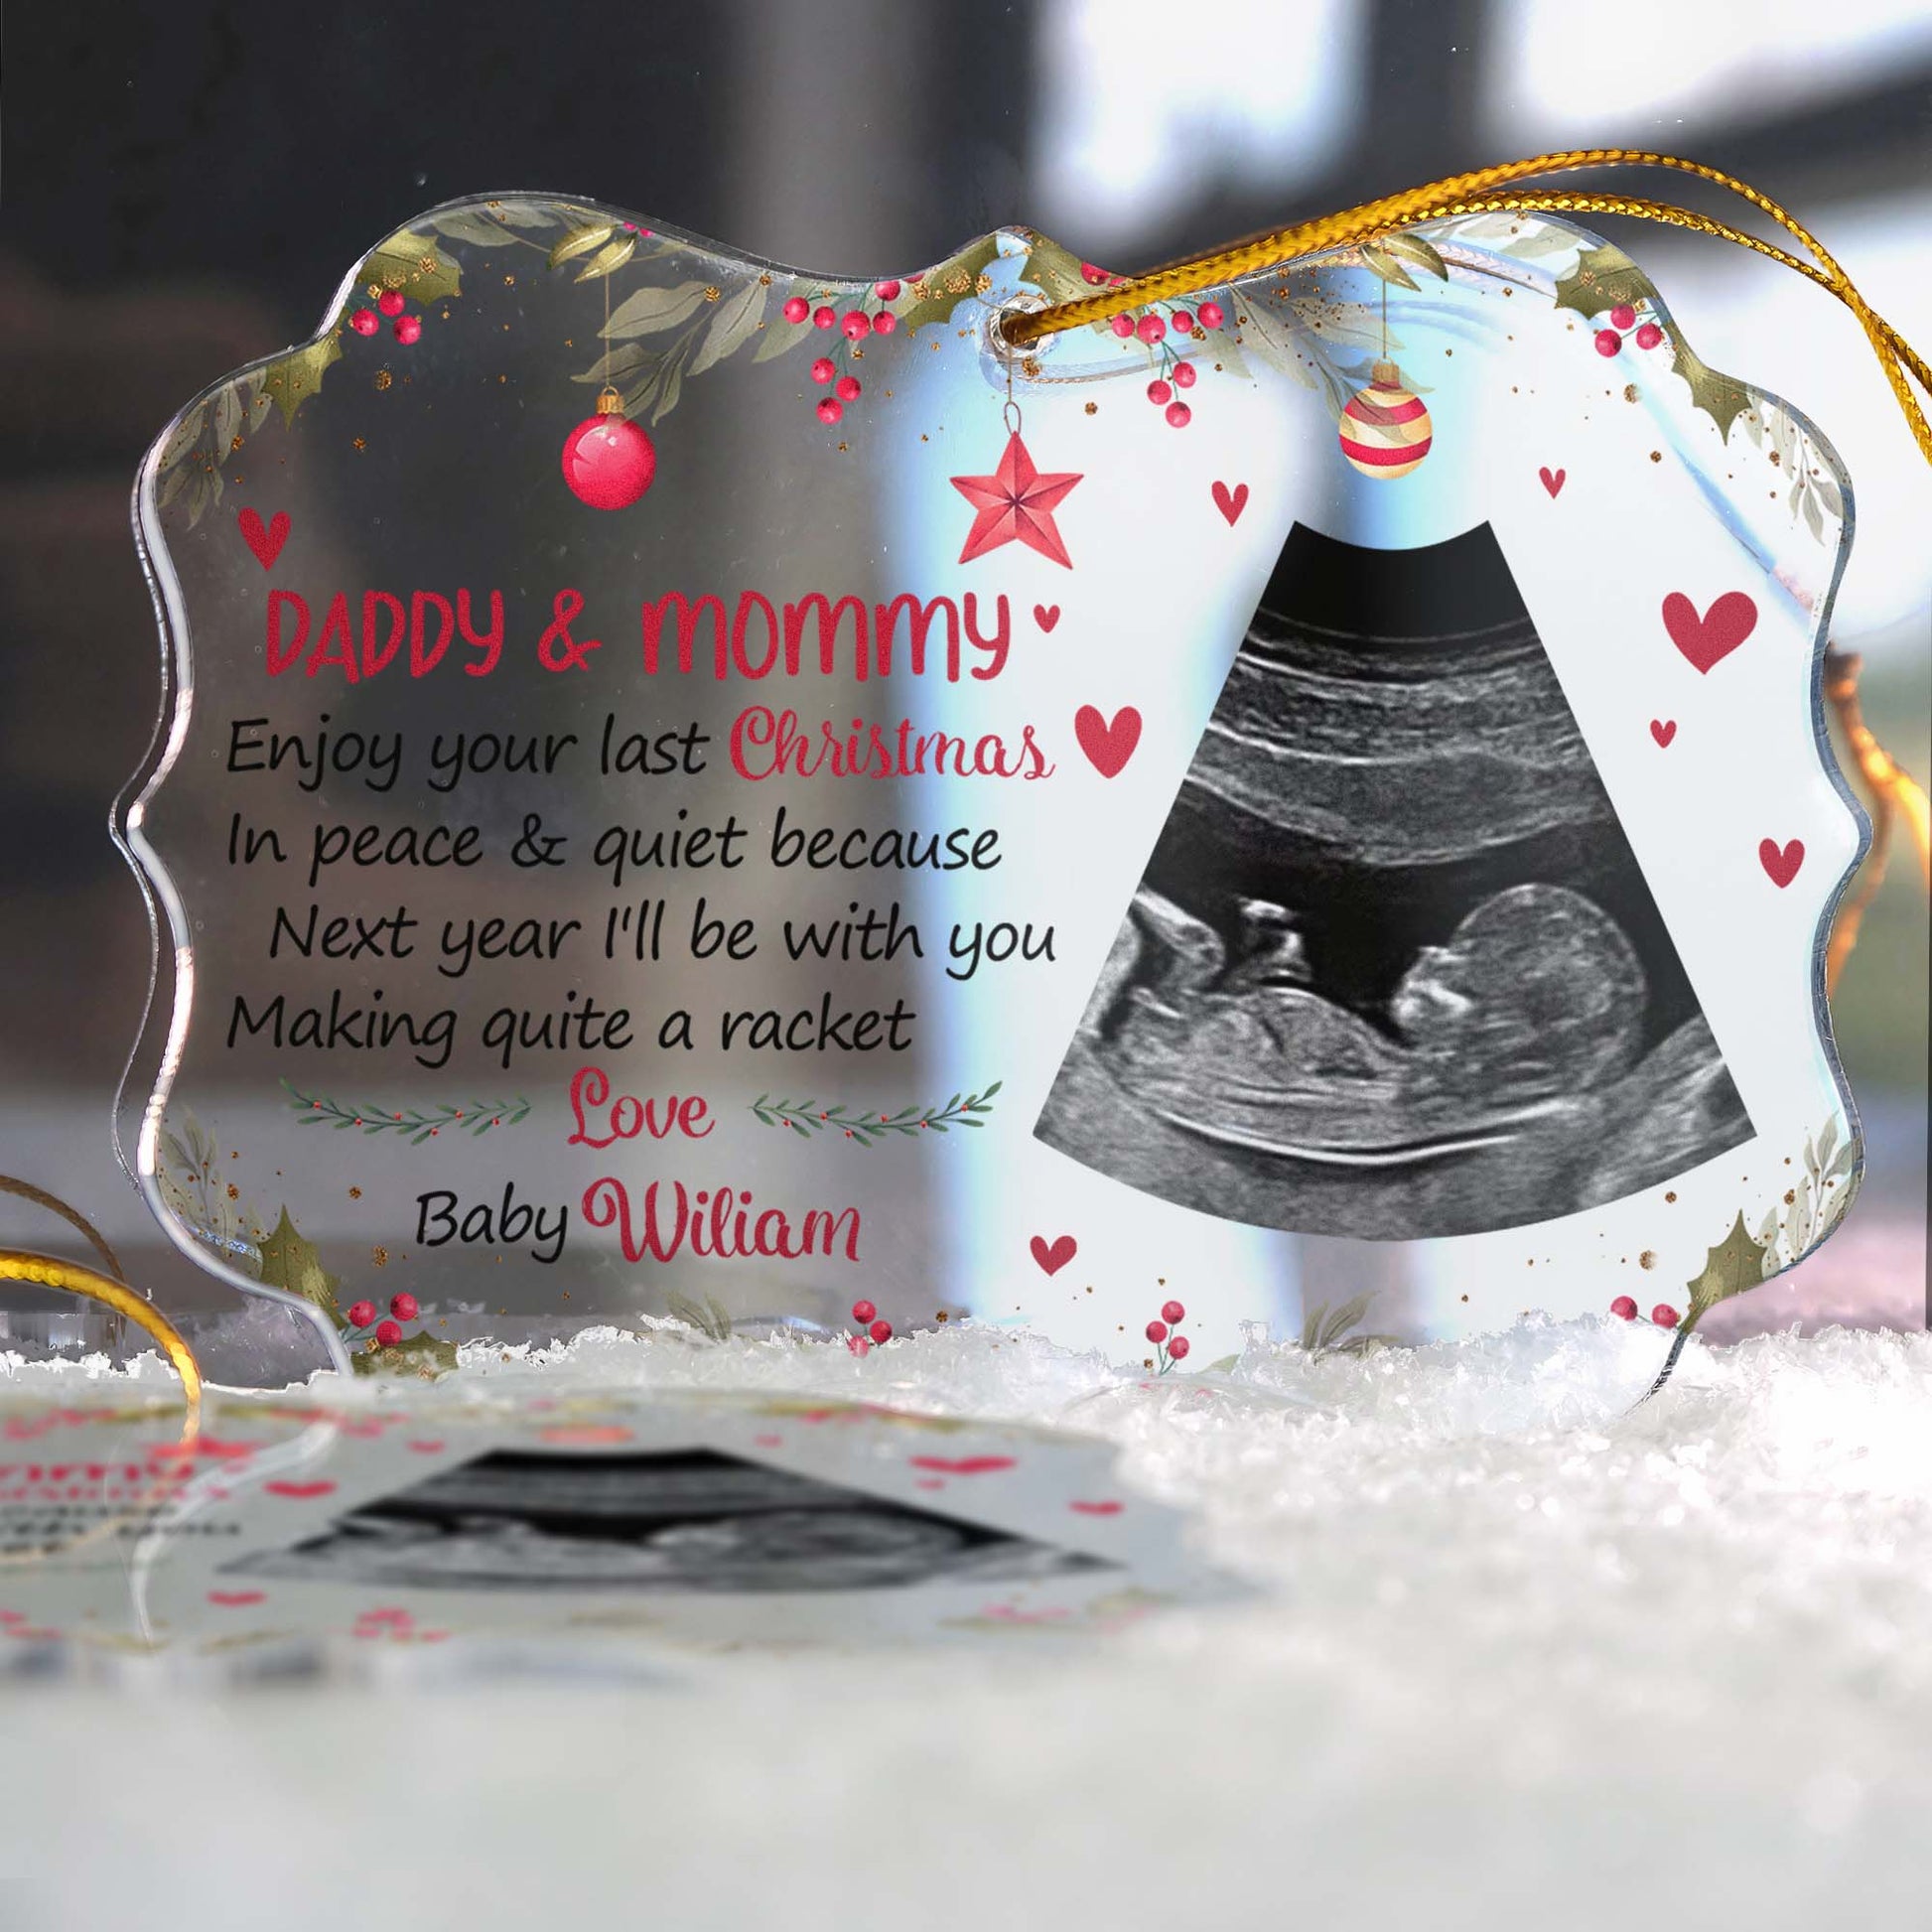 https://macorner.co/cdn/shop/products/Enjoy-Your-Last-Christmas-In-Peace-_-Quiet--Personalized-Acrylic-Ornament-Christmas-Gift-For-Daddy-To-Bemommy-to-be-mom-Father-Grandma-Grandpa-Family-Member-2.jpg?v=1663067695&width=1946